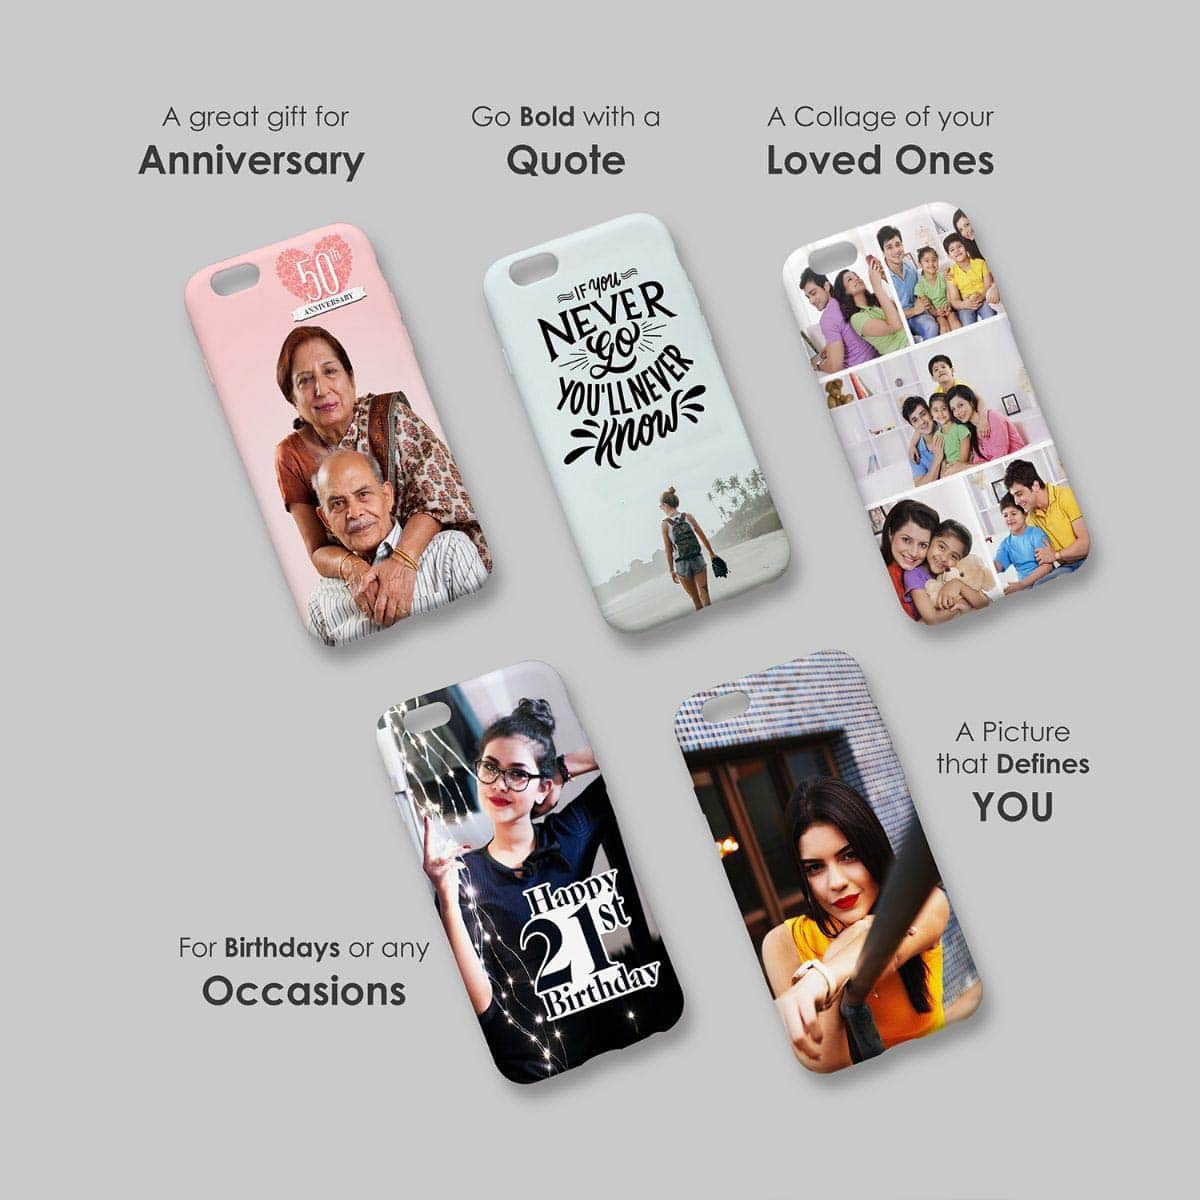 Personalised iPhone 12 Cases & Covers